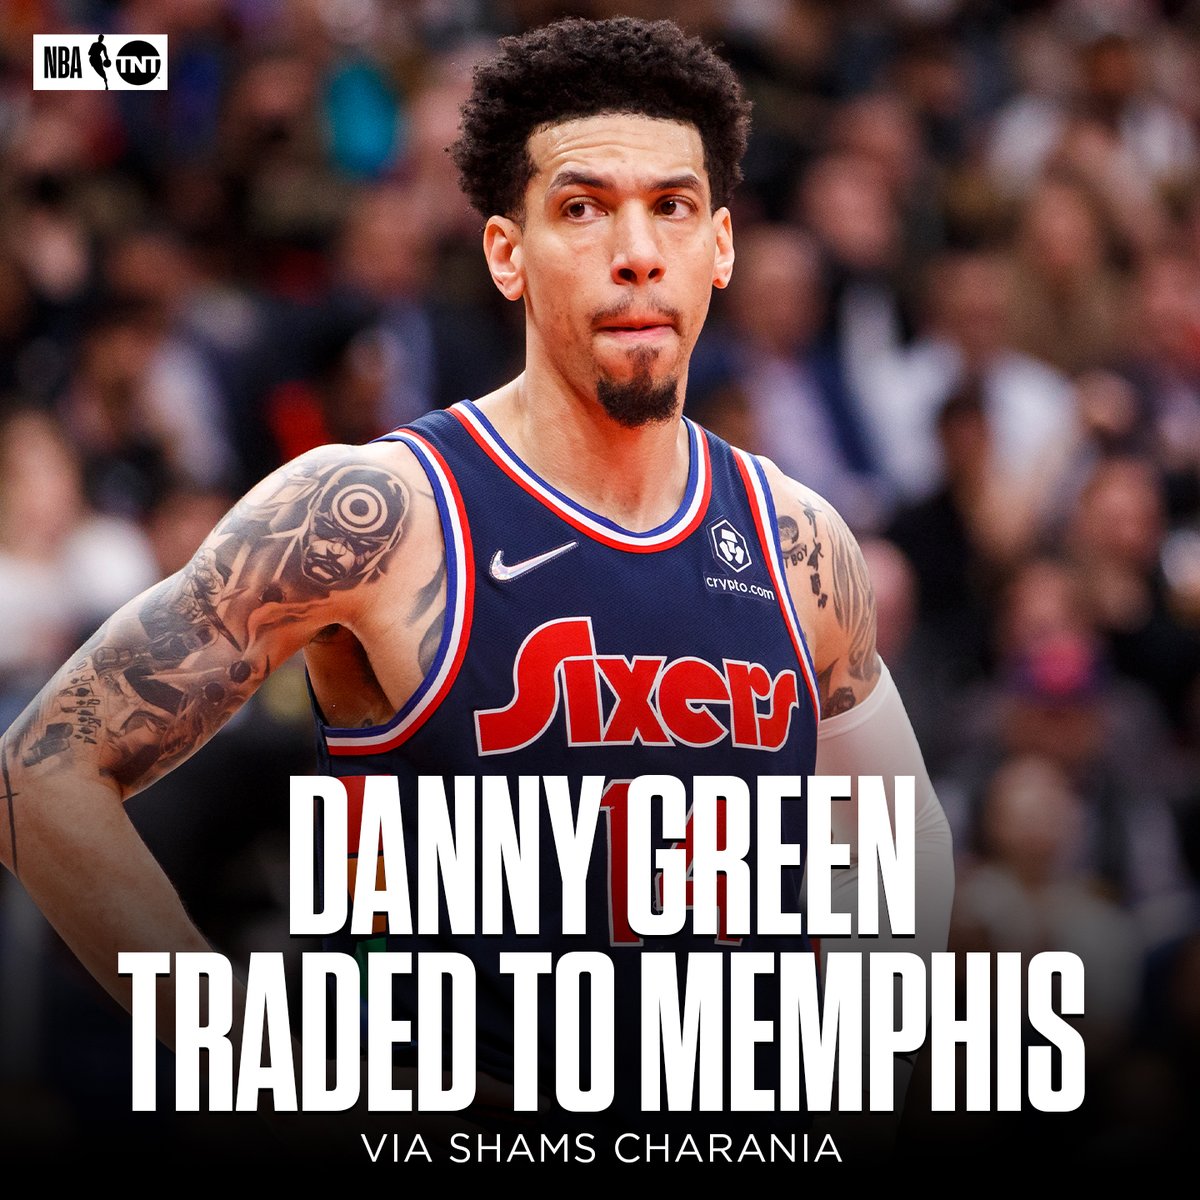 Philadelphia trades Danny Green and the No. 23 pick to the Grizzlies for DeAnthony Melton, per @ShamsCharania https://t.co/49Q3z4Vc9O